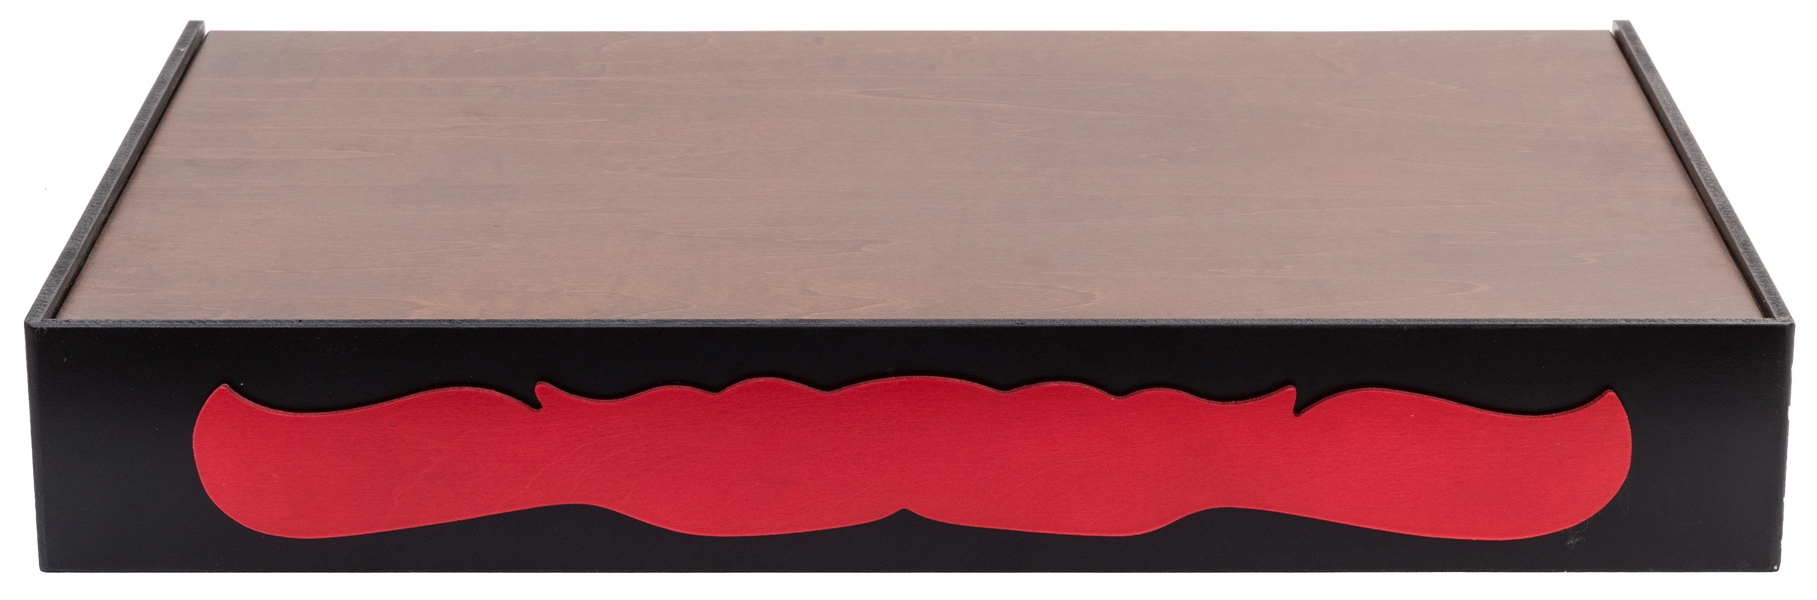  Mikame Mujinzo Production Box Accessory Table Top. Wooden t...